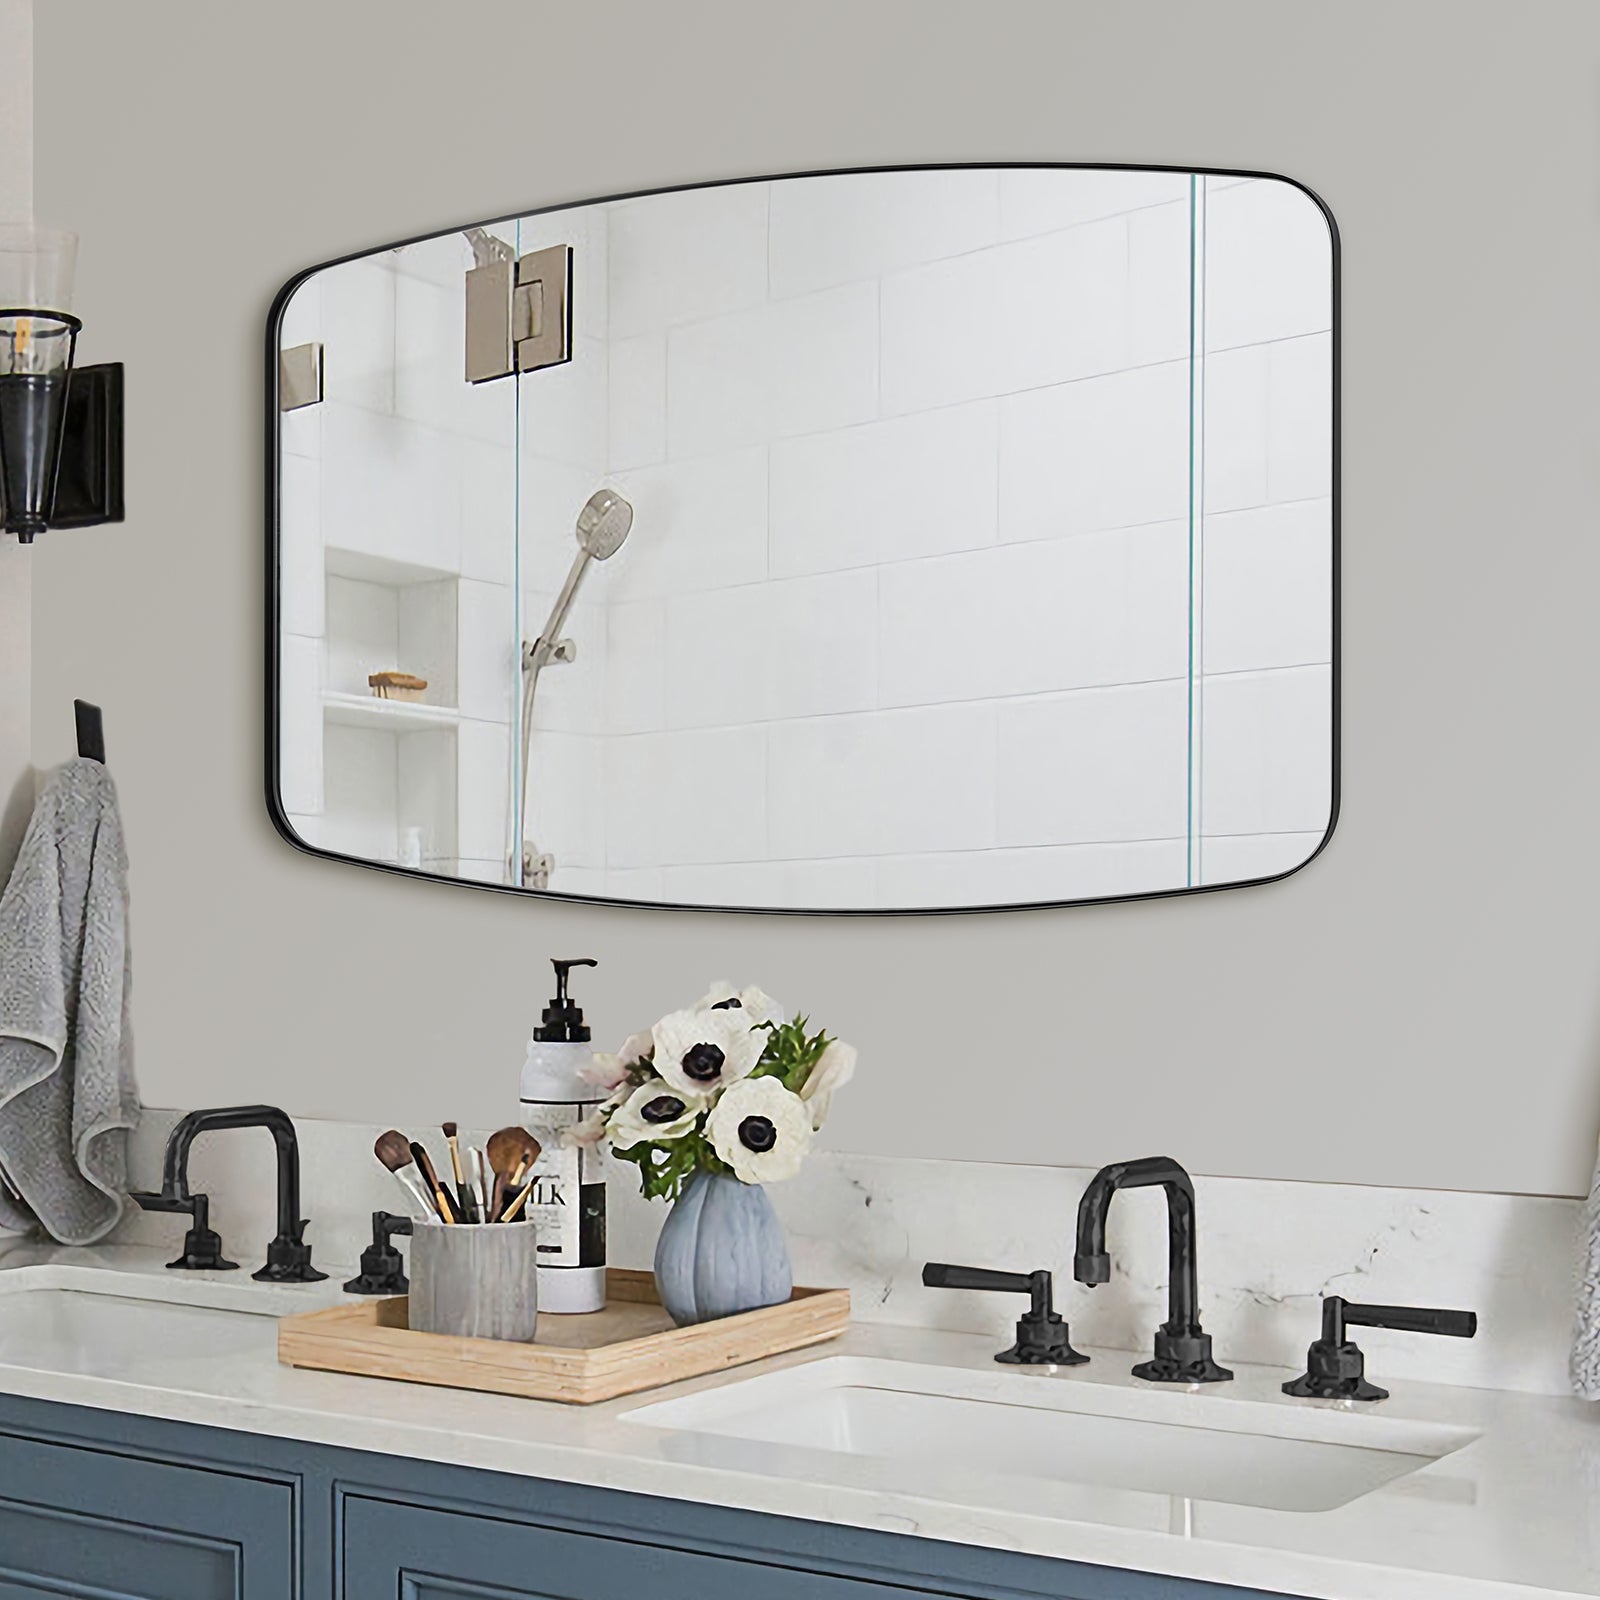 Modern Oblong Oval Wall Mounted Bathroom Mirror with Stainless Steel Frame